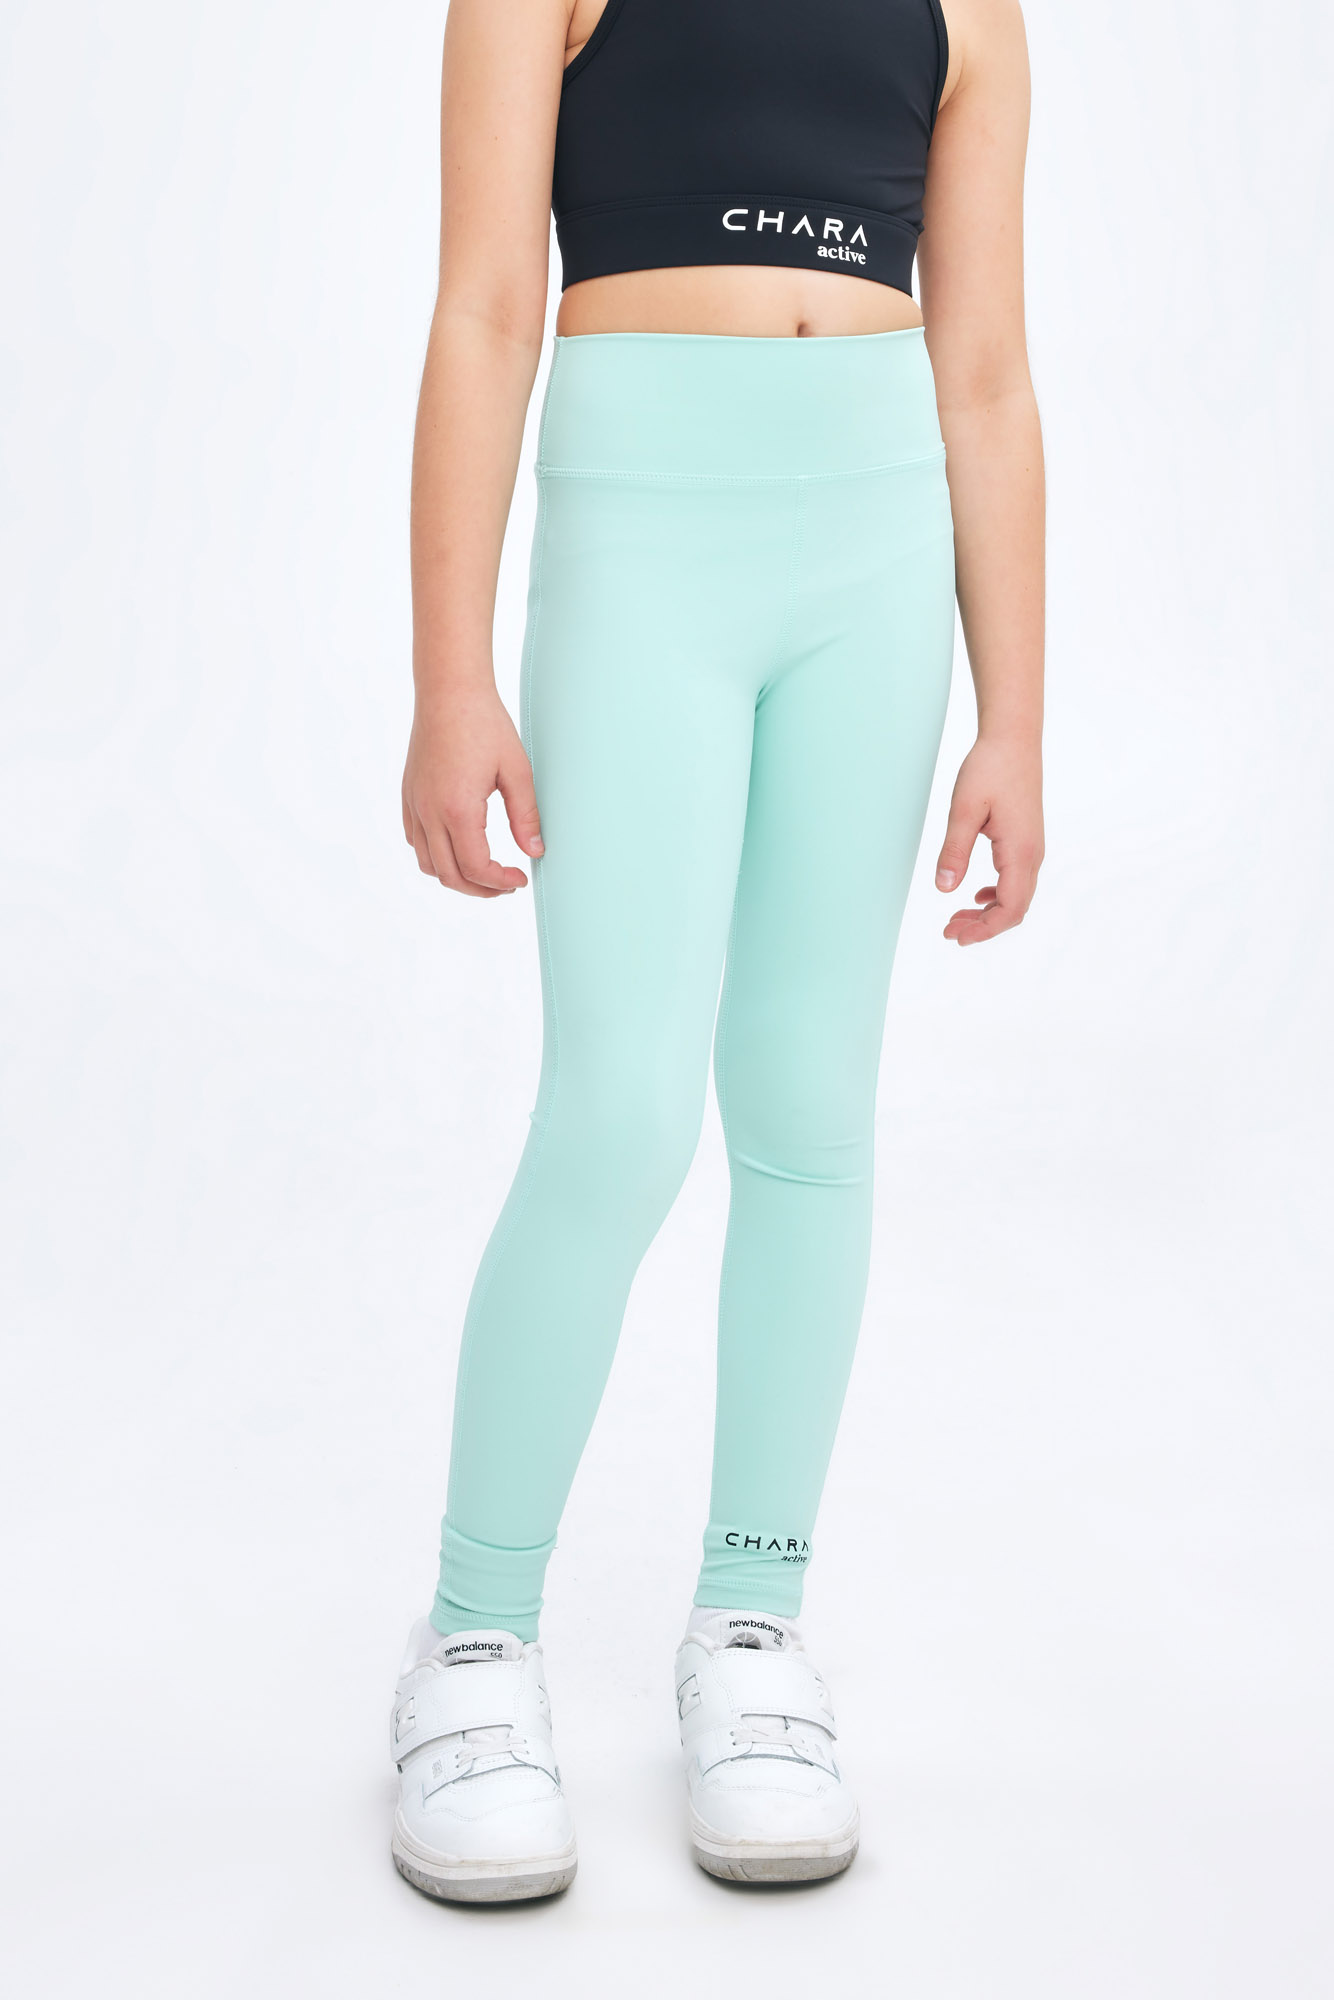 Grey, green and white sports leggings - CLAIRE Waist S Colour Grey-white- green Waist S Colour Grey-white-green